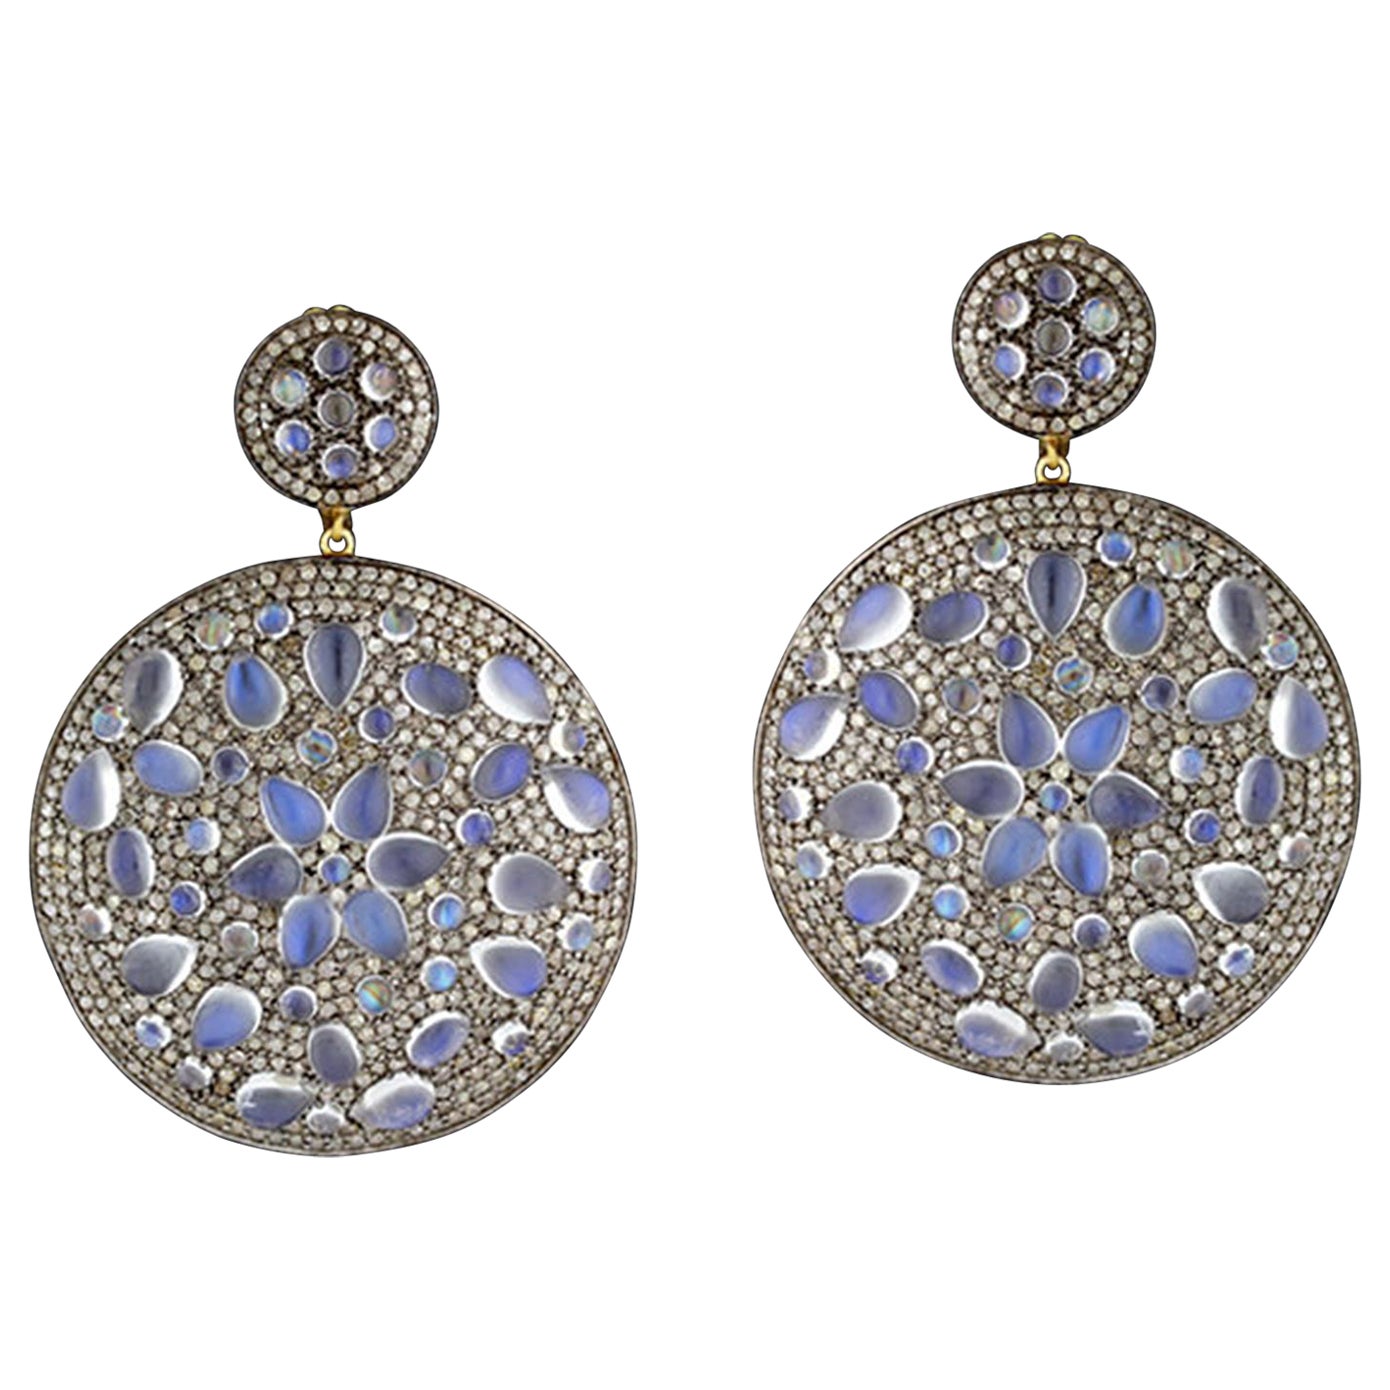 Pave Diamond Earrings Equipped with Moonstones Made in 14k Yellow Gold For Sale